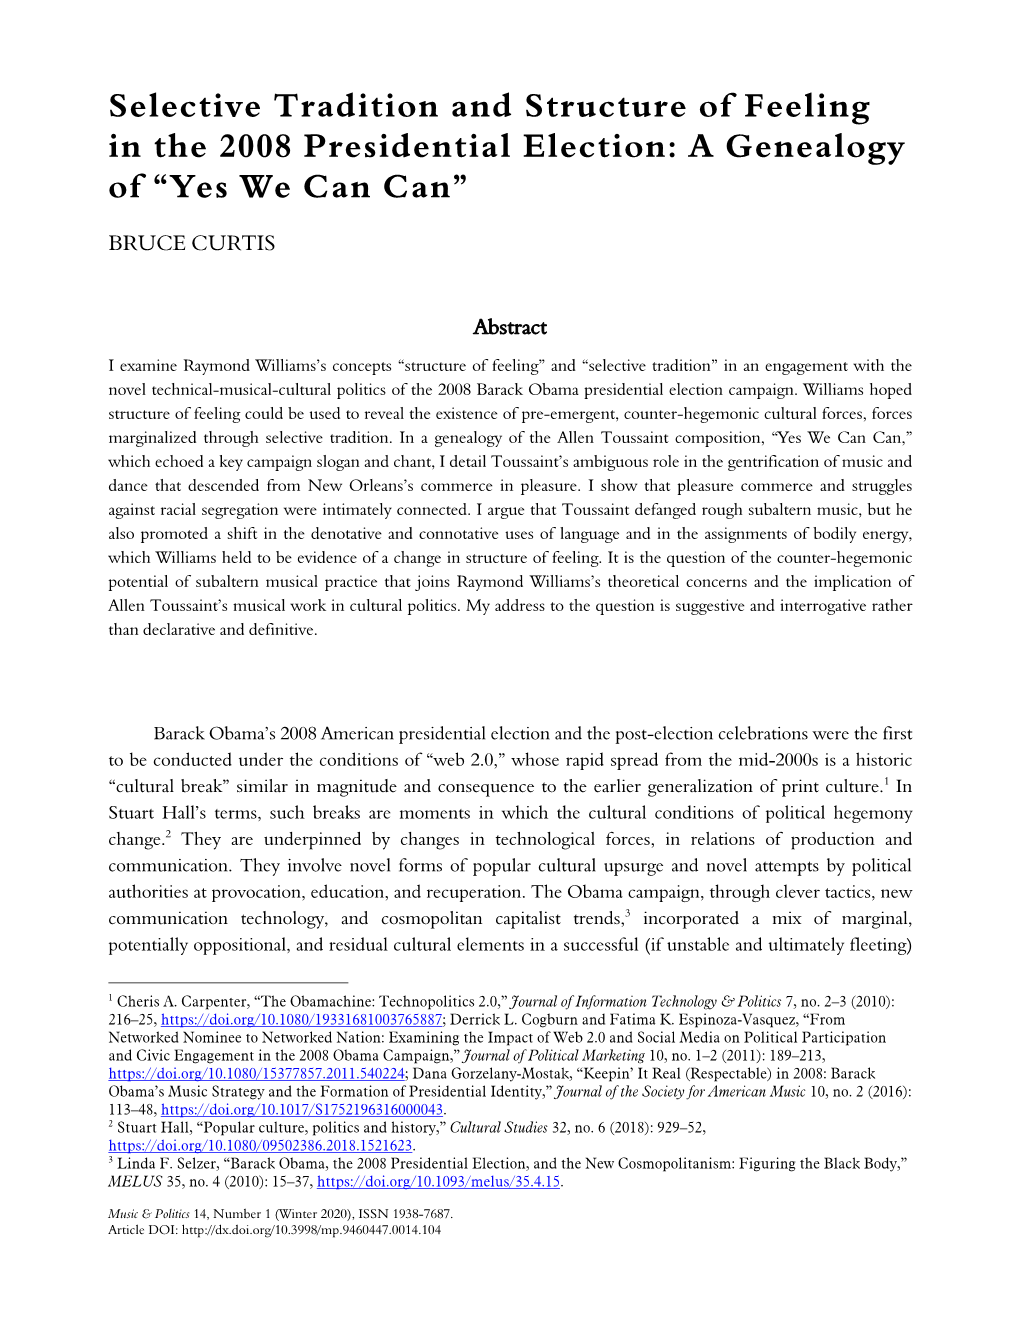 Selective Tradition and Structure of Feeling in the 2008 Presidential Election: a Genealogy of “Yes We Can Can”